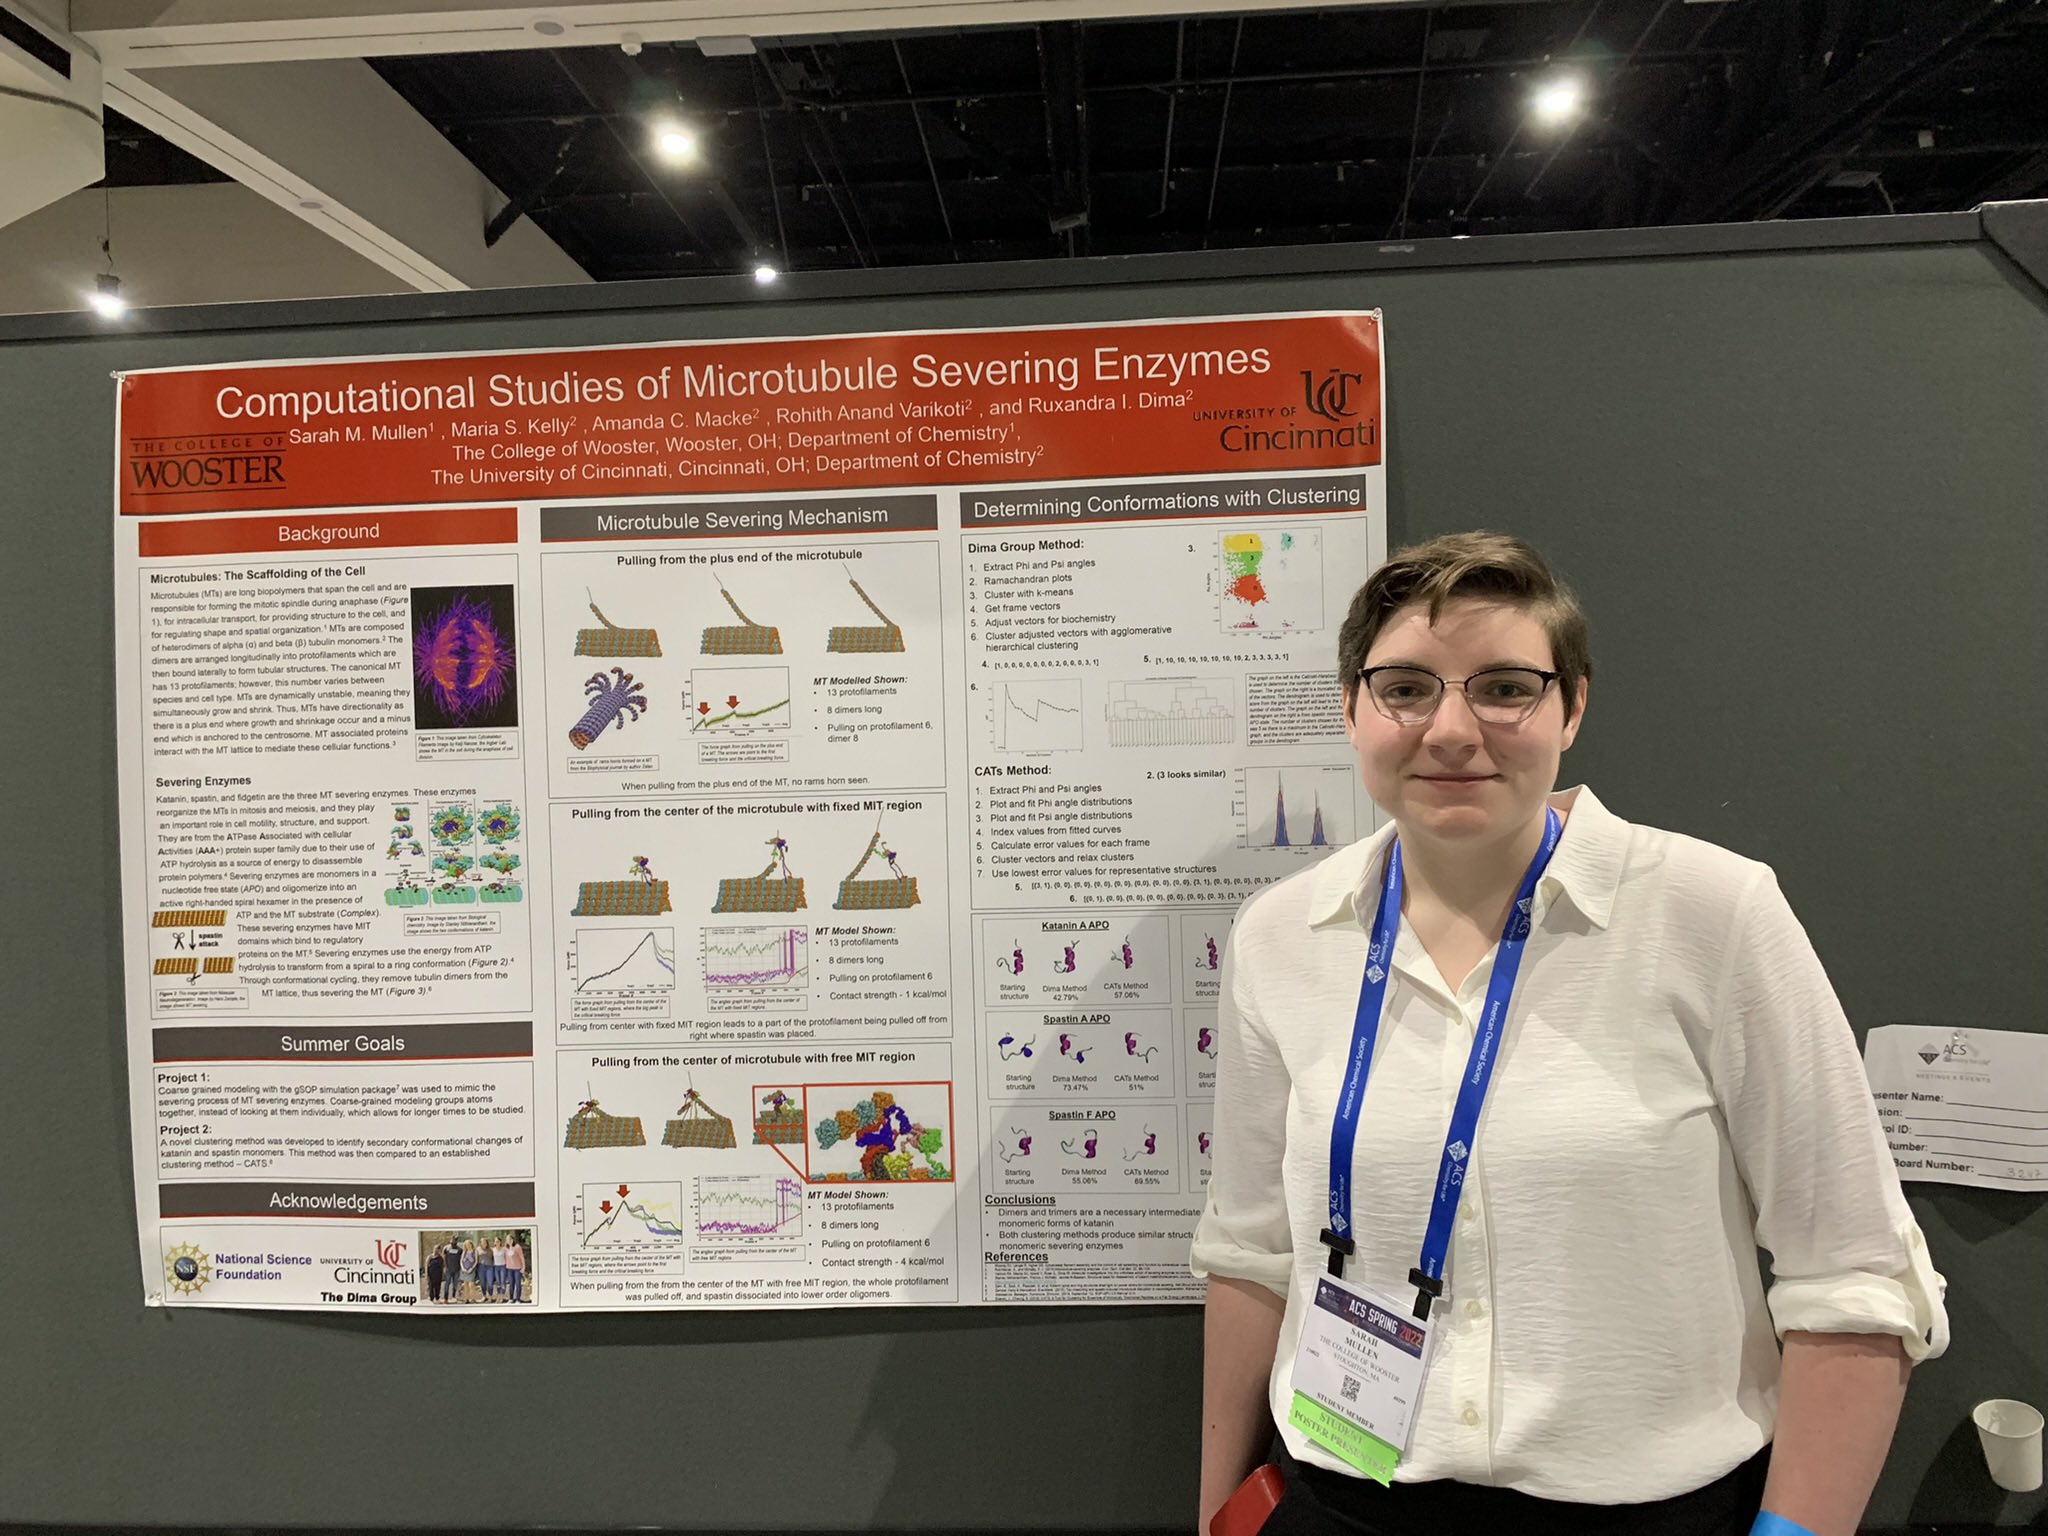 on Twitter: "Perfect presentation Sarah at the ACS meeting San Diego. We enjoyed having you in the REU program. Keep the good work! https://t.co/jdCExJN26d" / Twitter